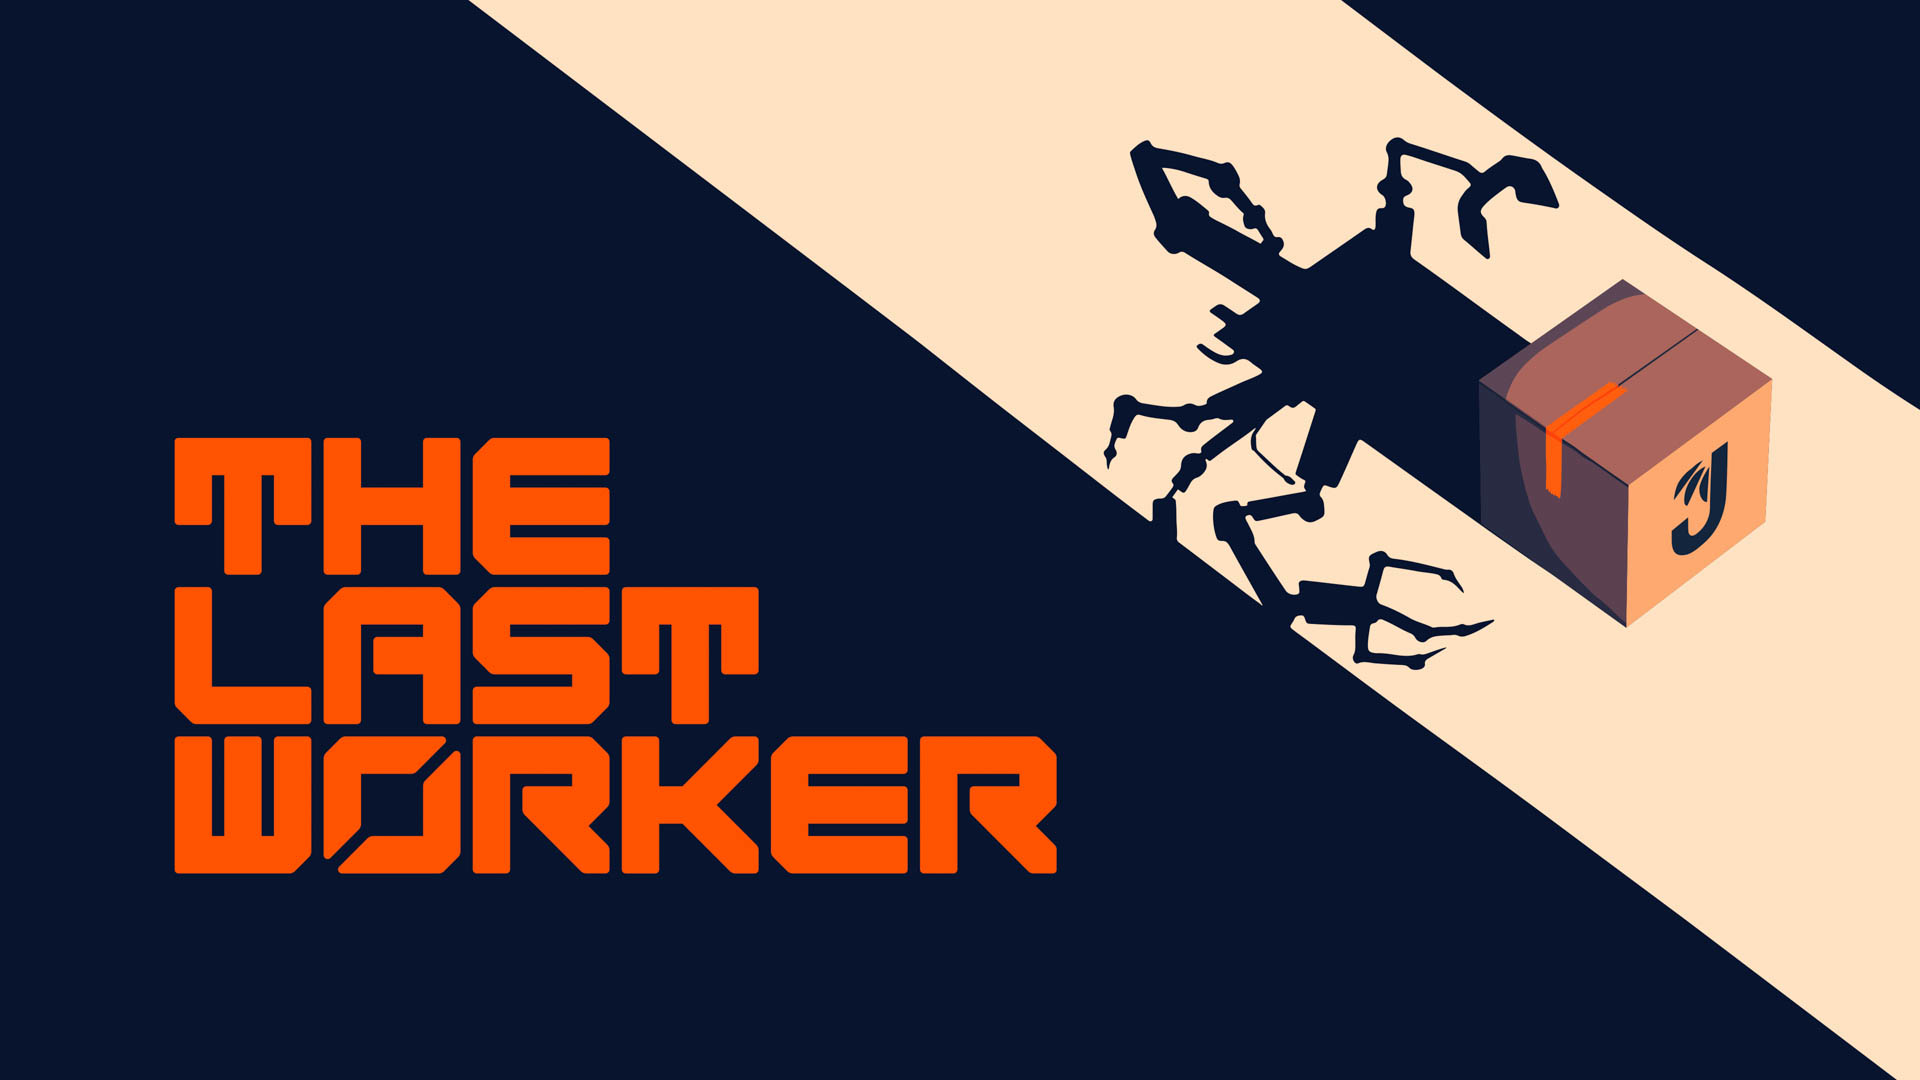 The key art for The Last Worker.